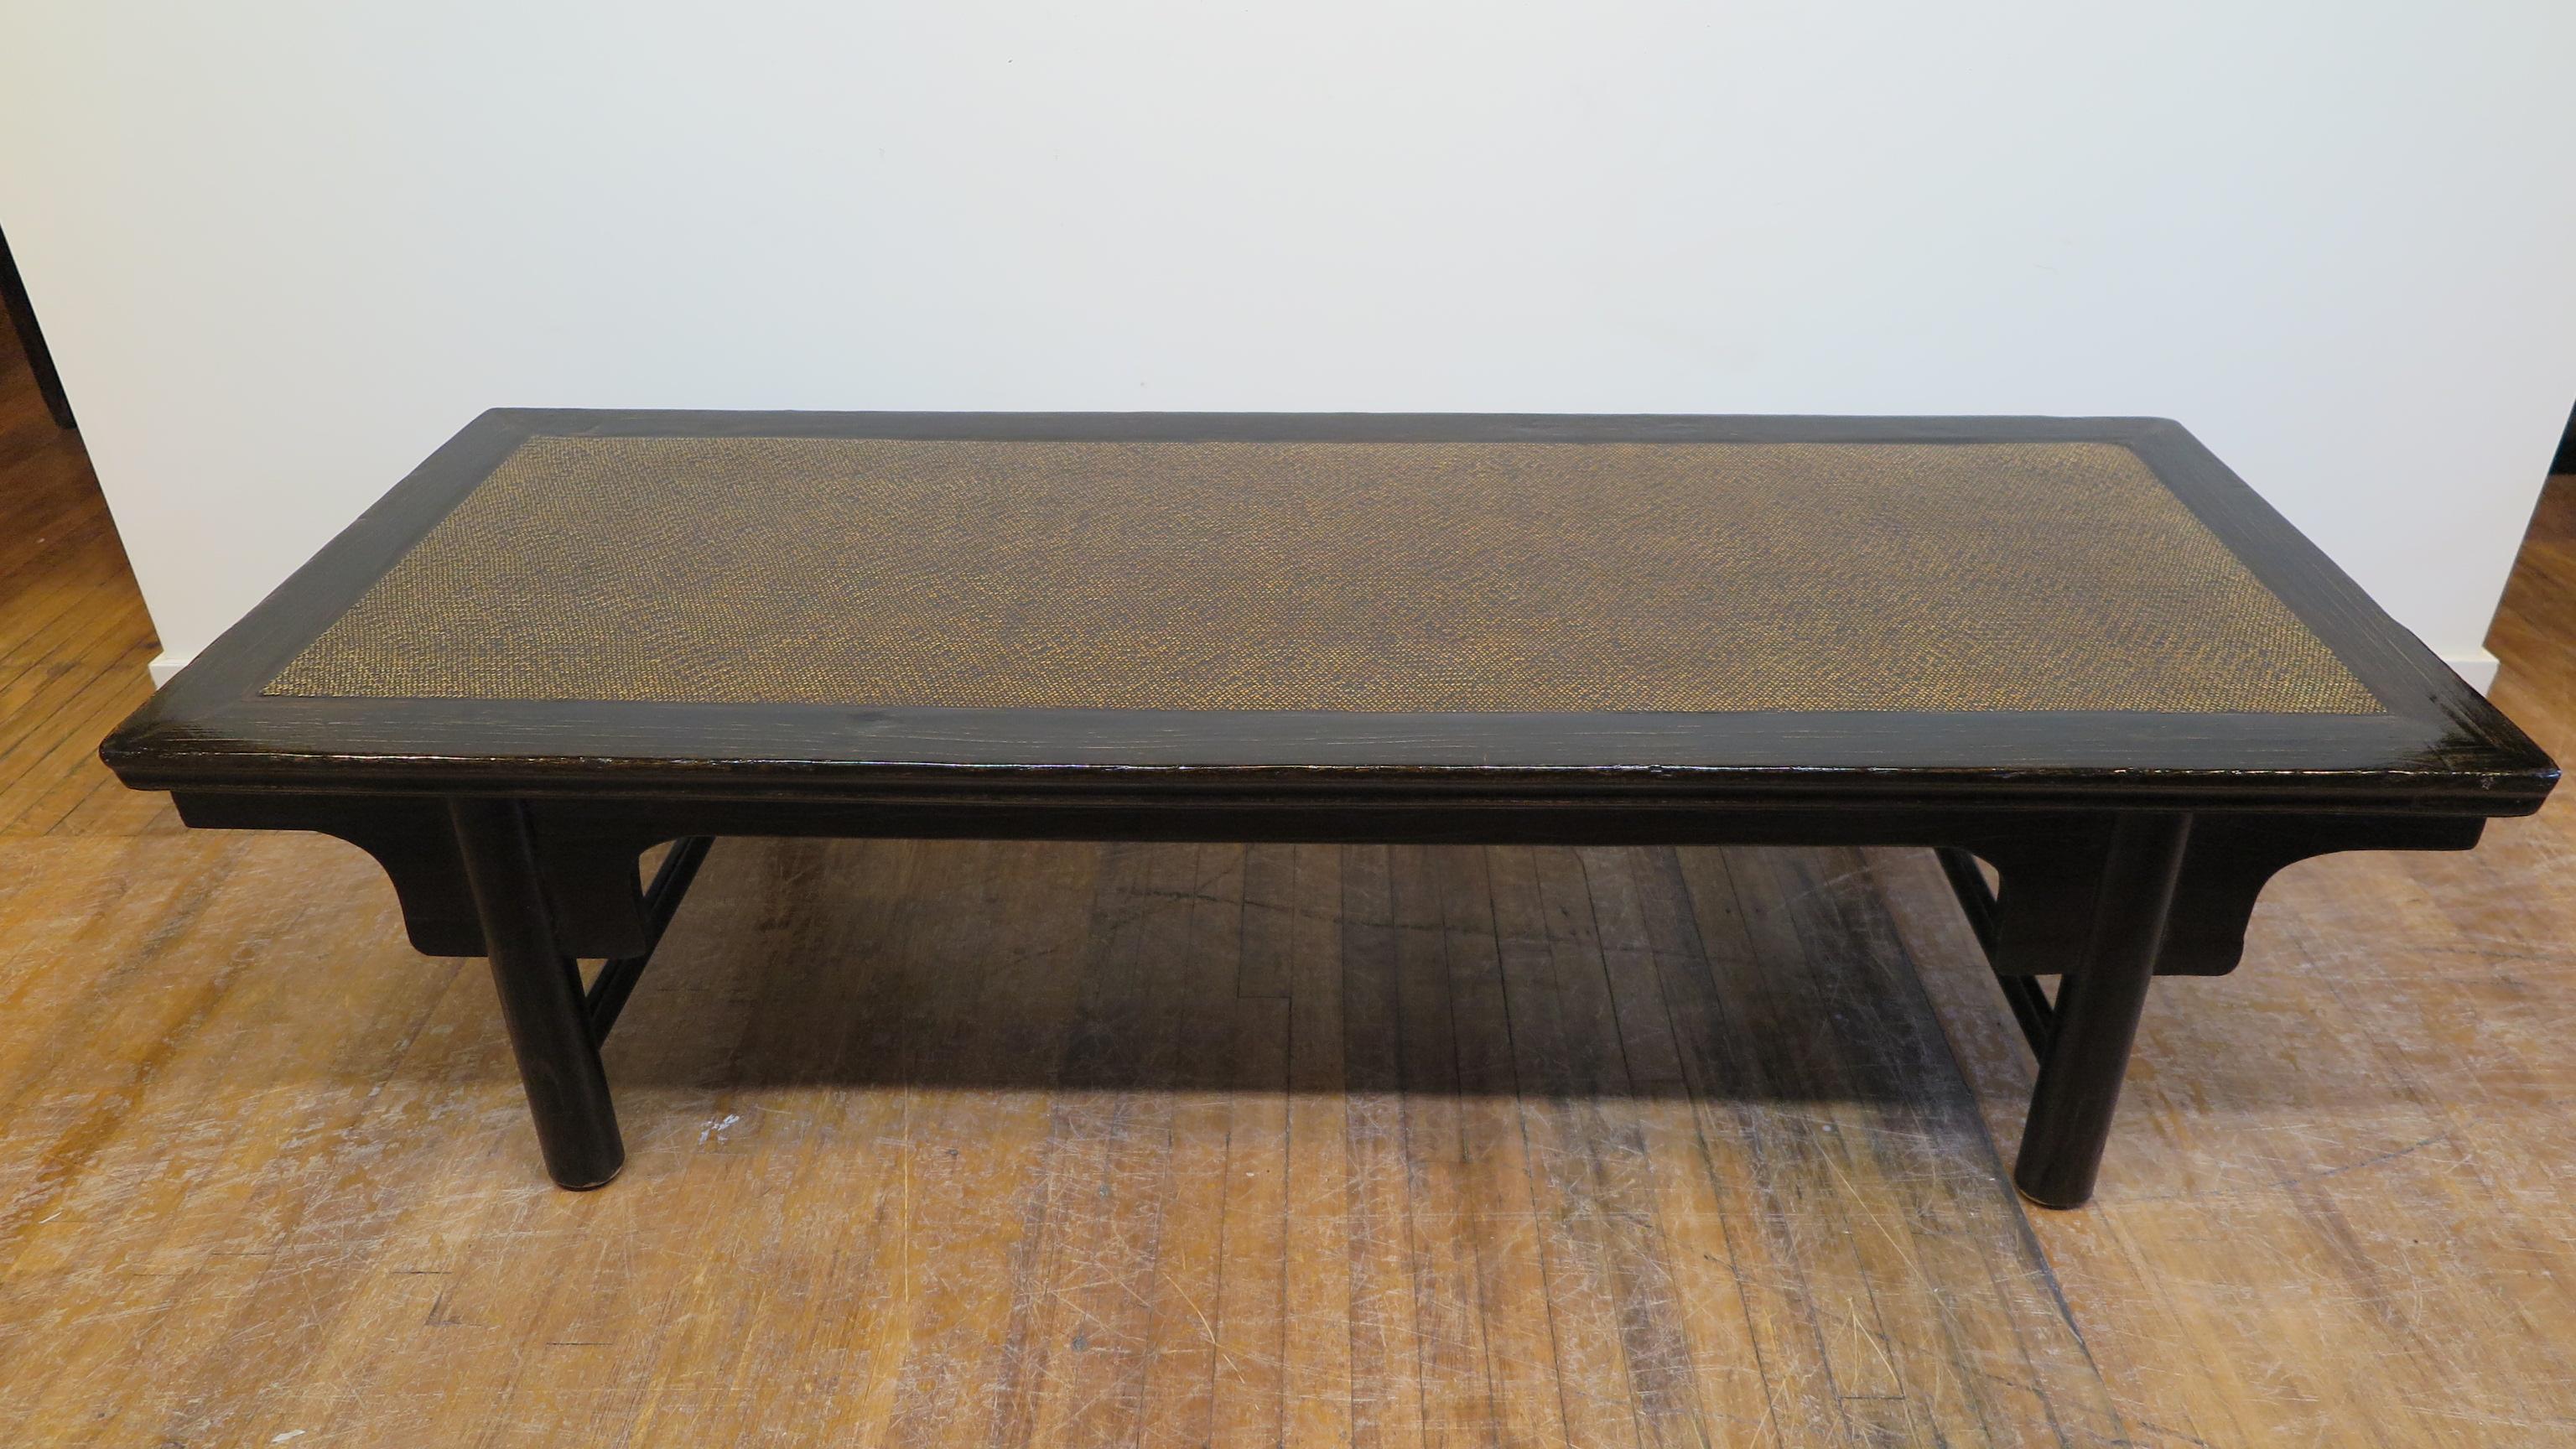 19th century Chinese day bed, coffee, cocktail table. Worn ebony color highlights a rich Elm wood frame with rattan matt top having hand applied lacquer finish. Simple details of a shadow apron with spandrel outline the entire table. Having